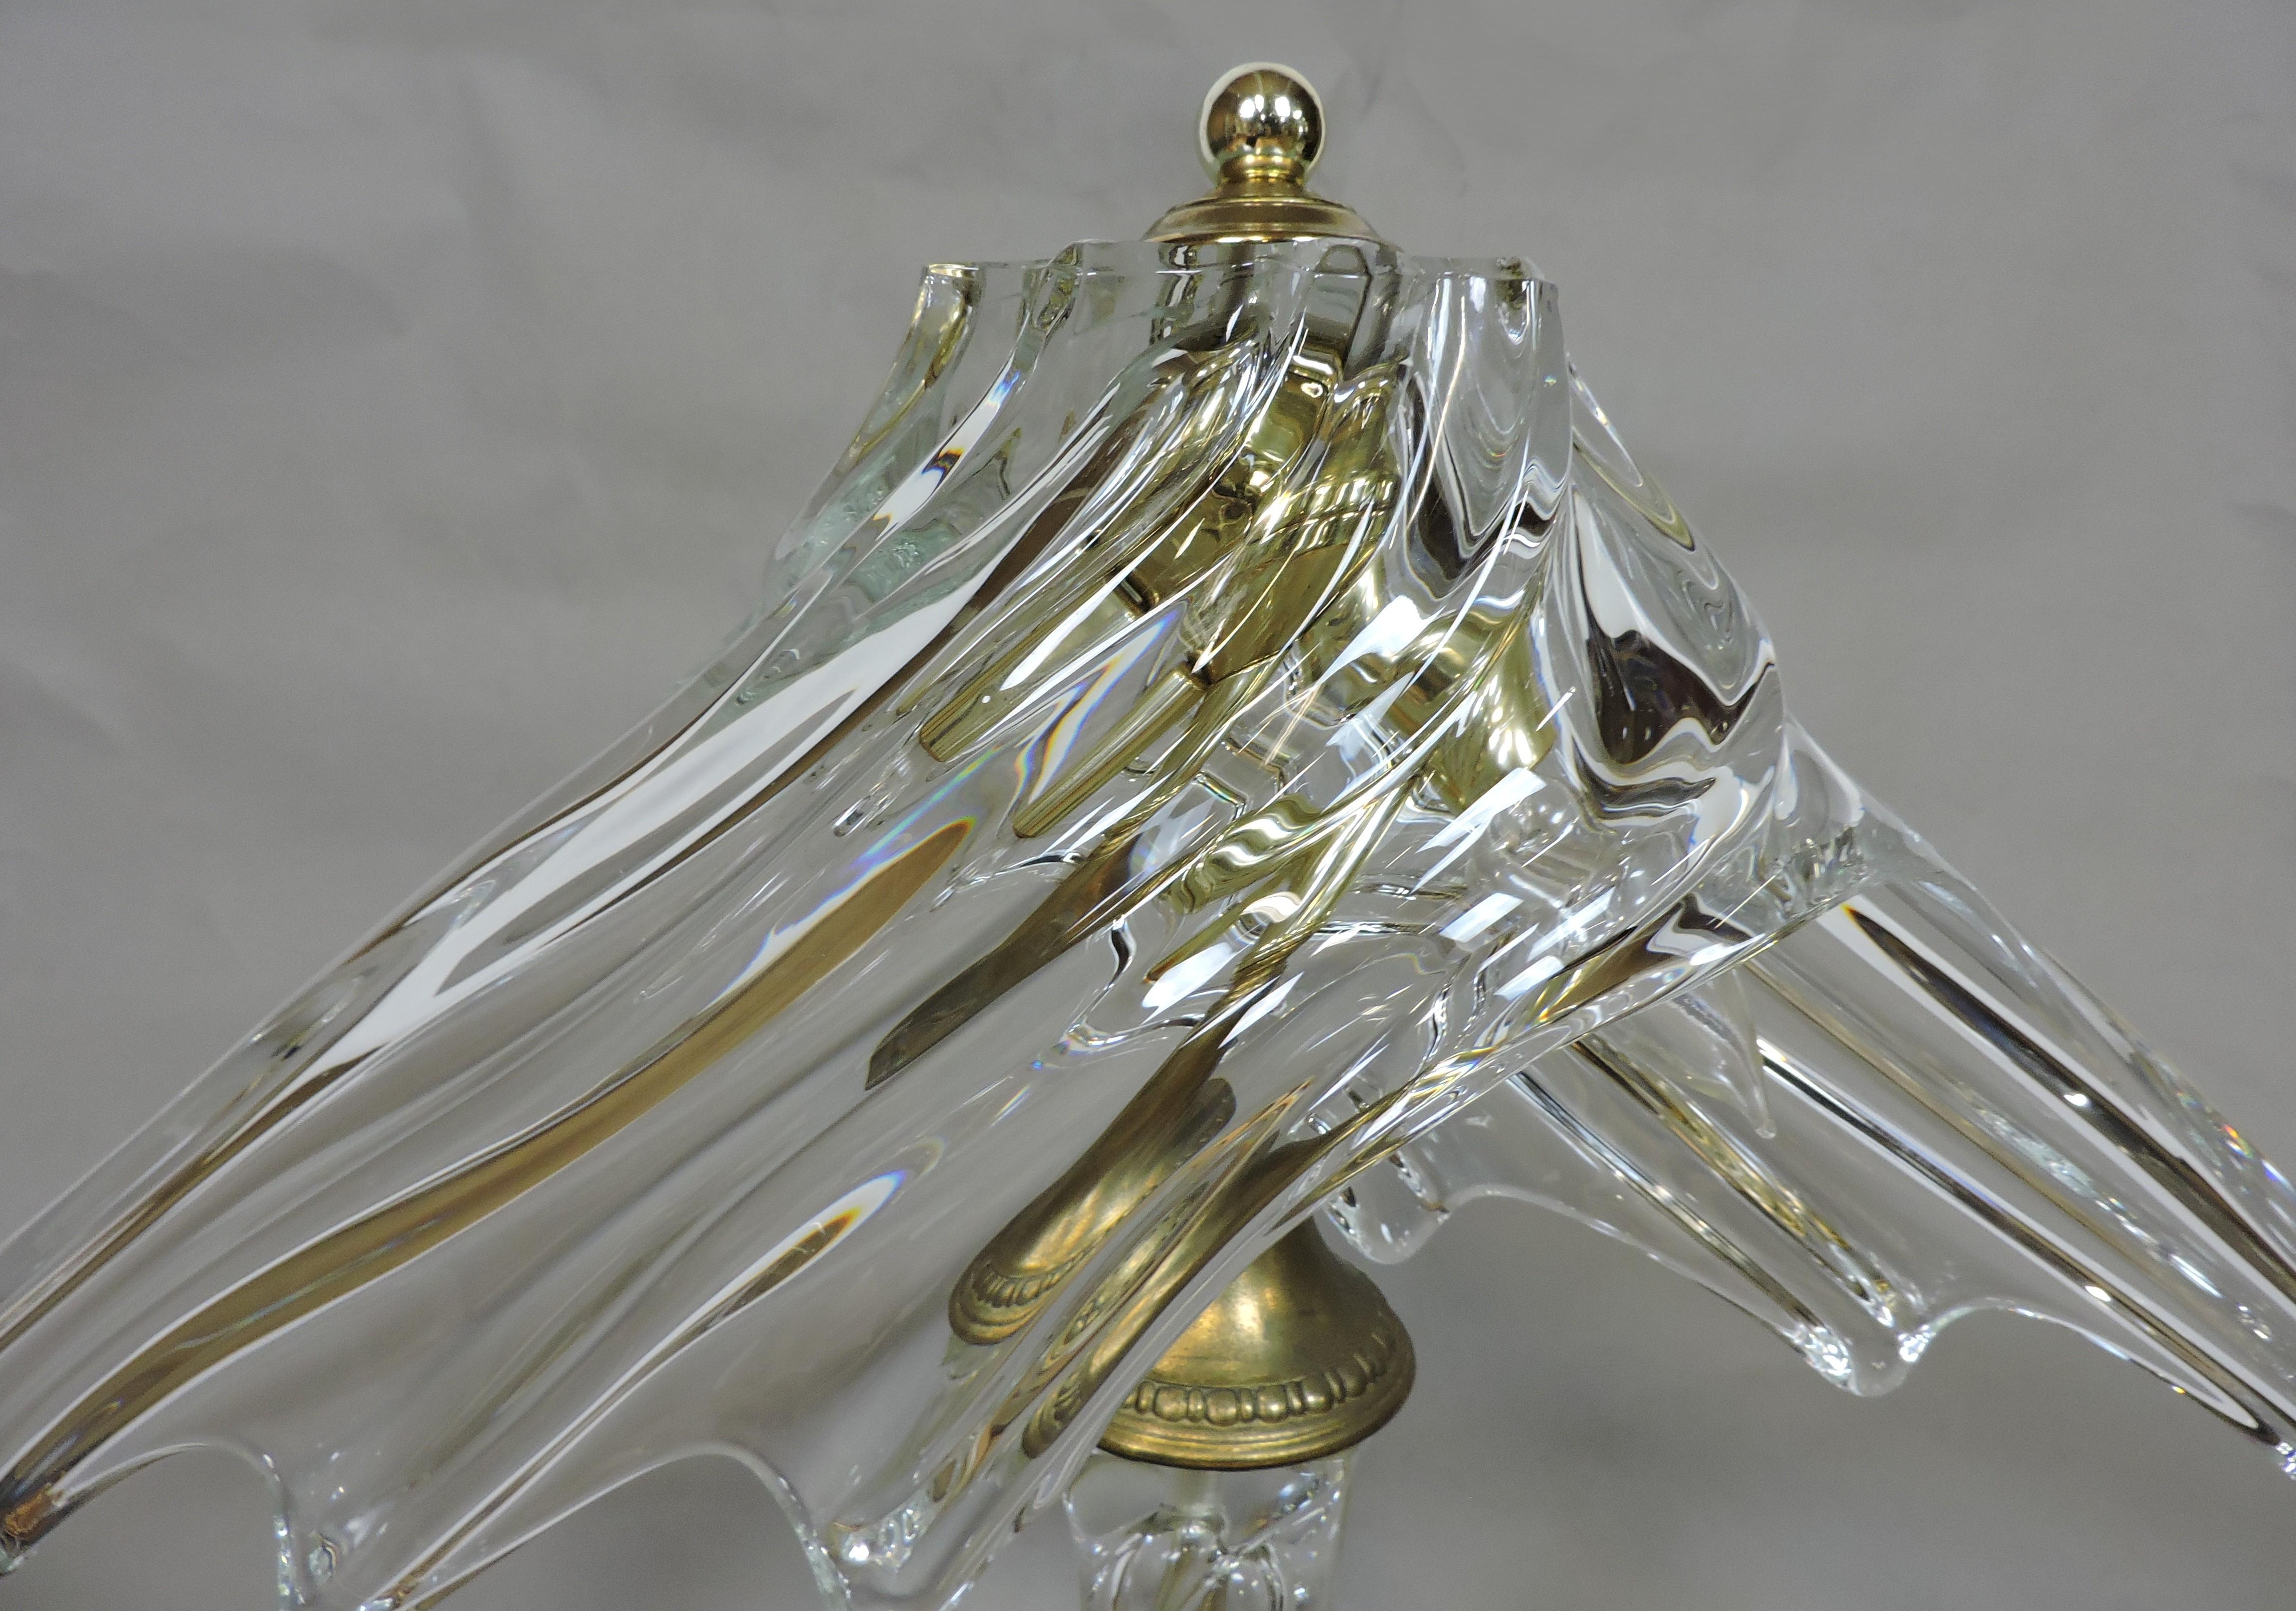 Glamorous hand blown crystal lamp by Cofrac Art Verrier France. This heavy and impressive sized lamp has a fluid, freeform shaped shade and base, and is beautiful when lit. It takes two candelabra bulbs and has an inline on/off switch.
 